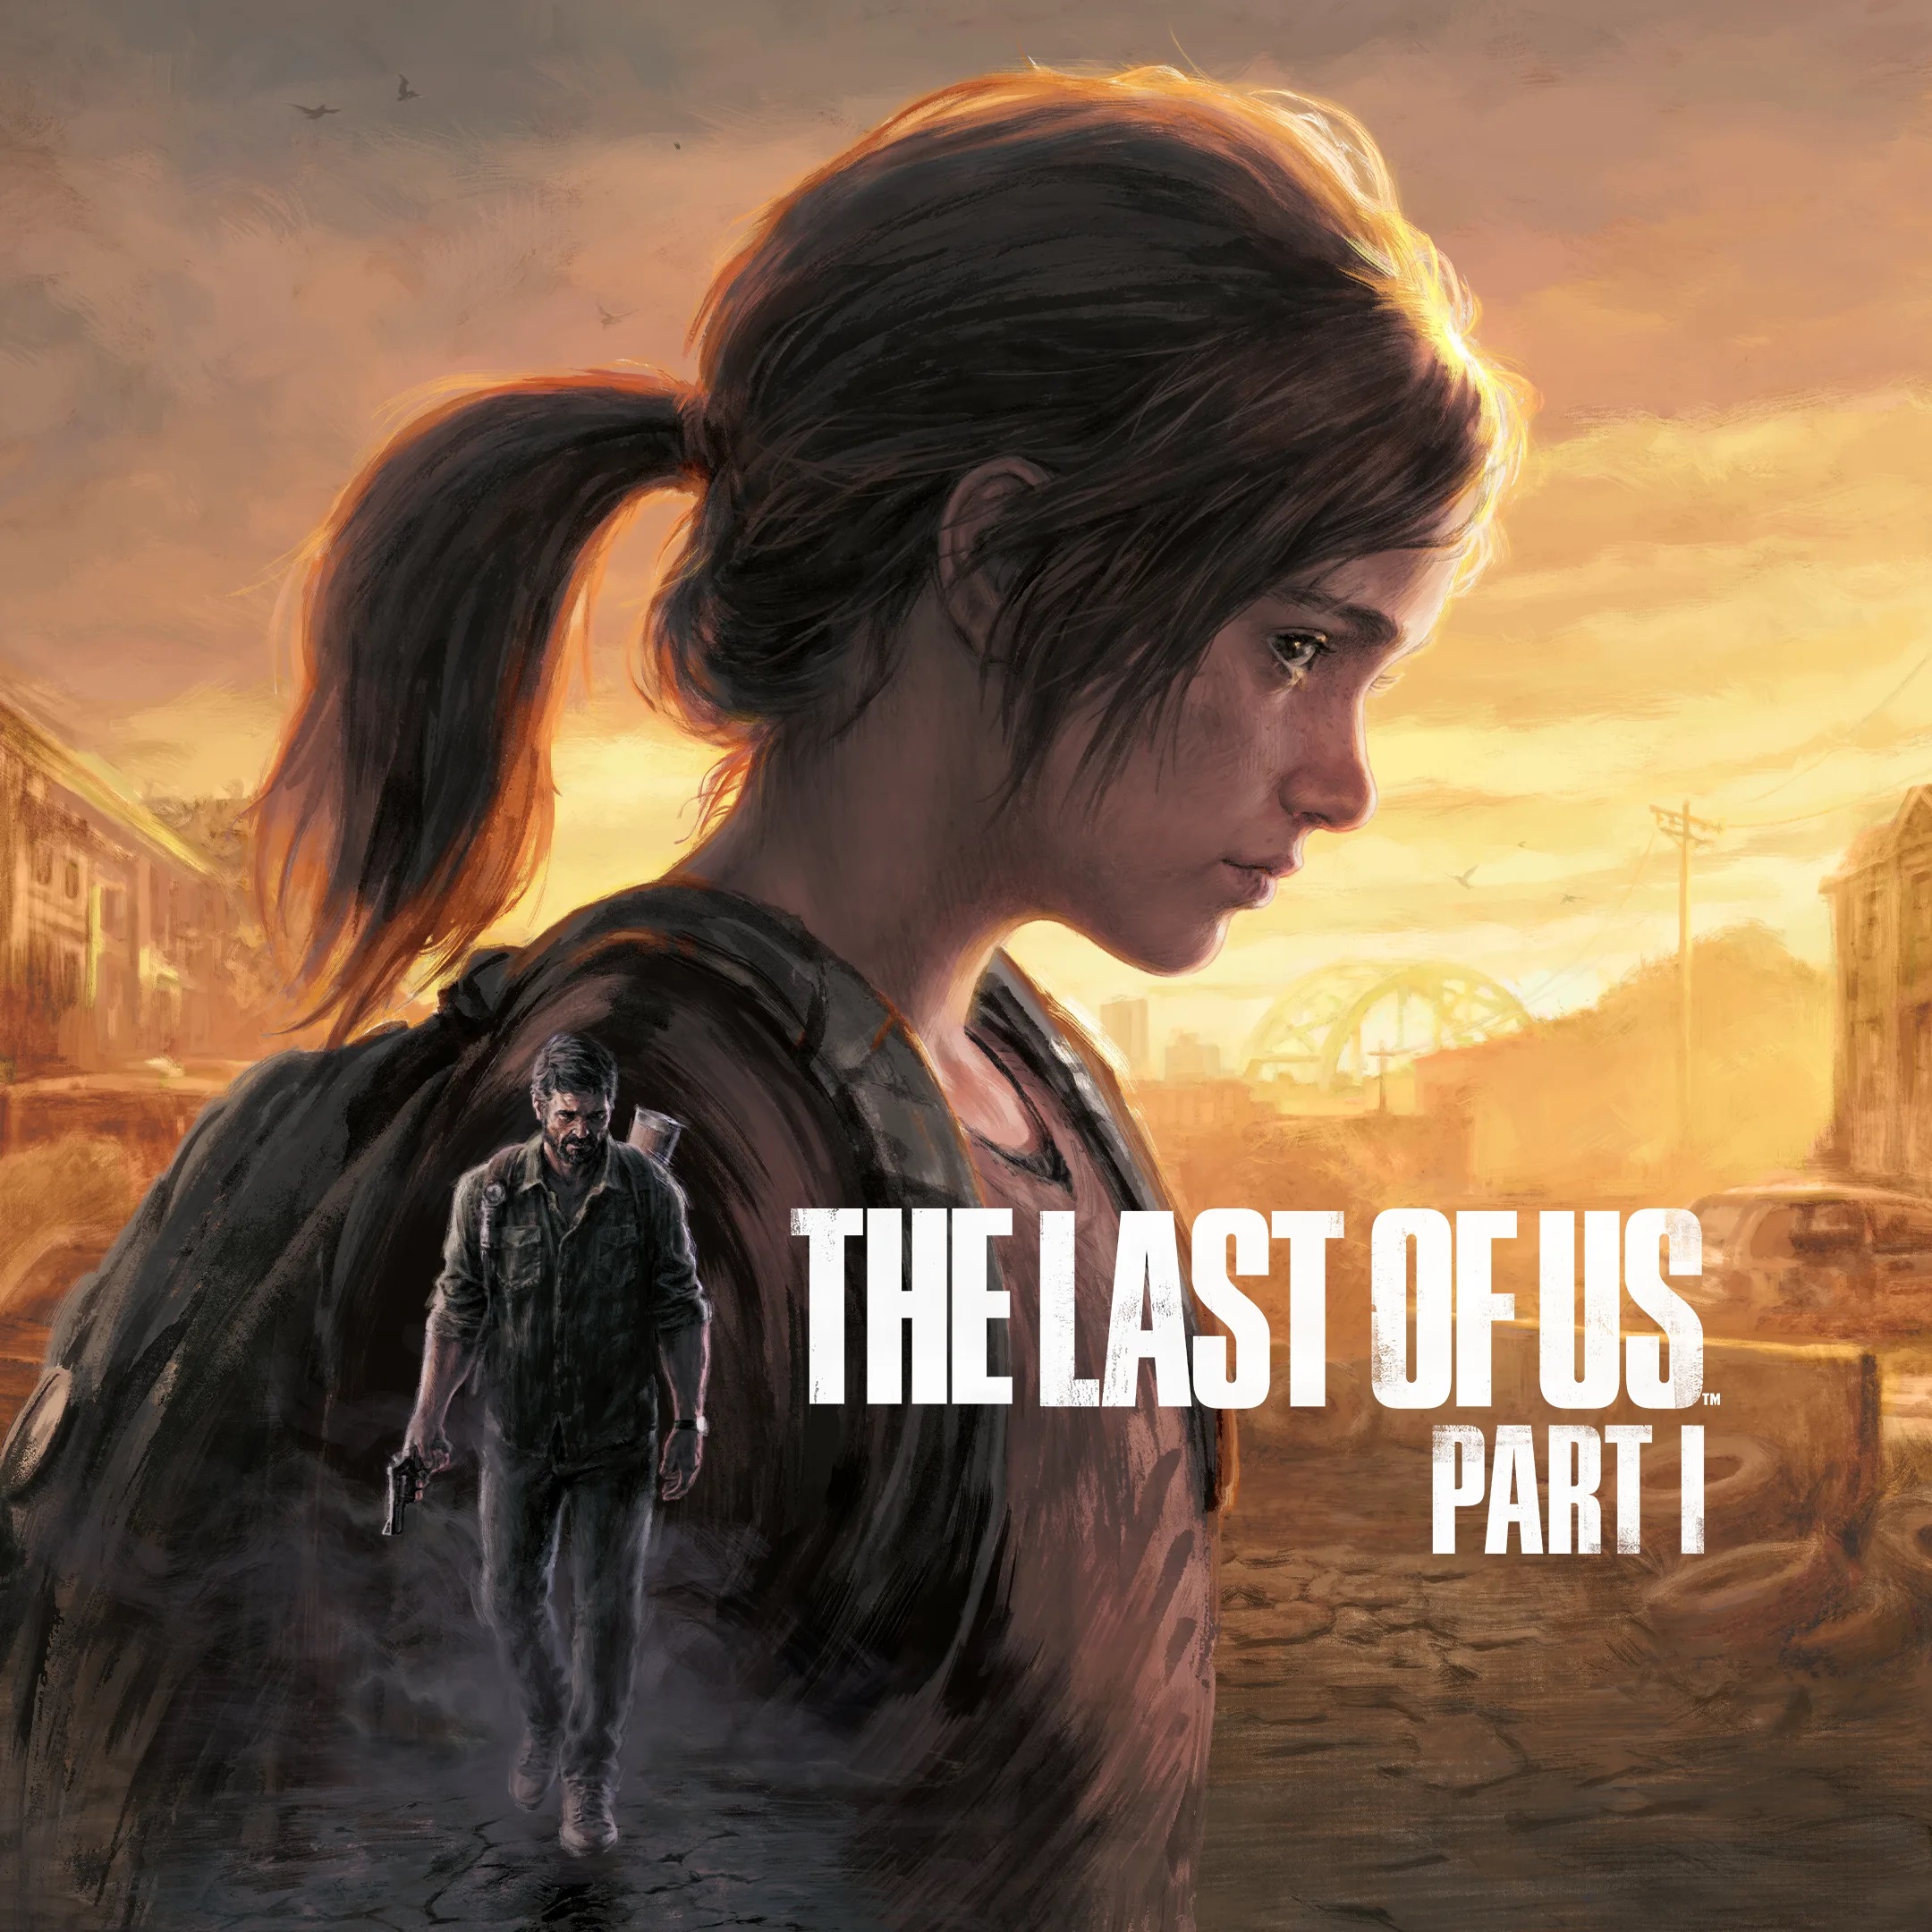 The Last of Us Part 1: PC Trailer